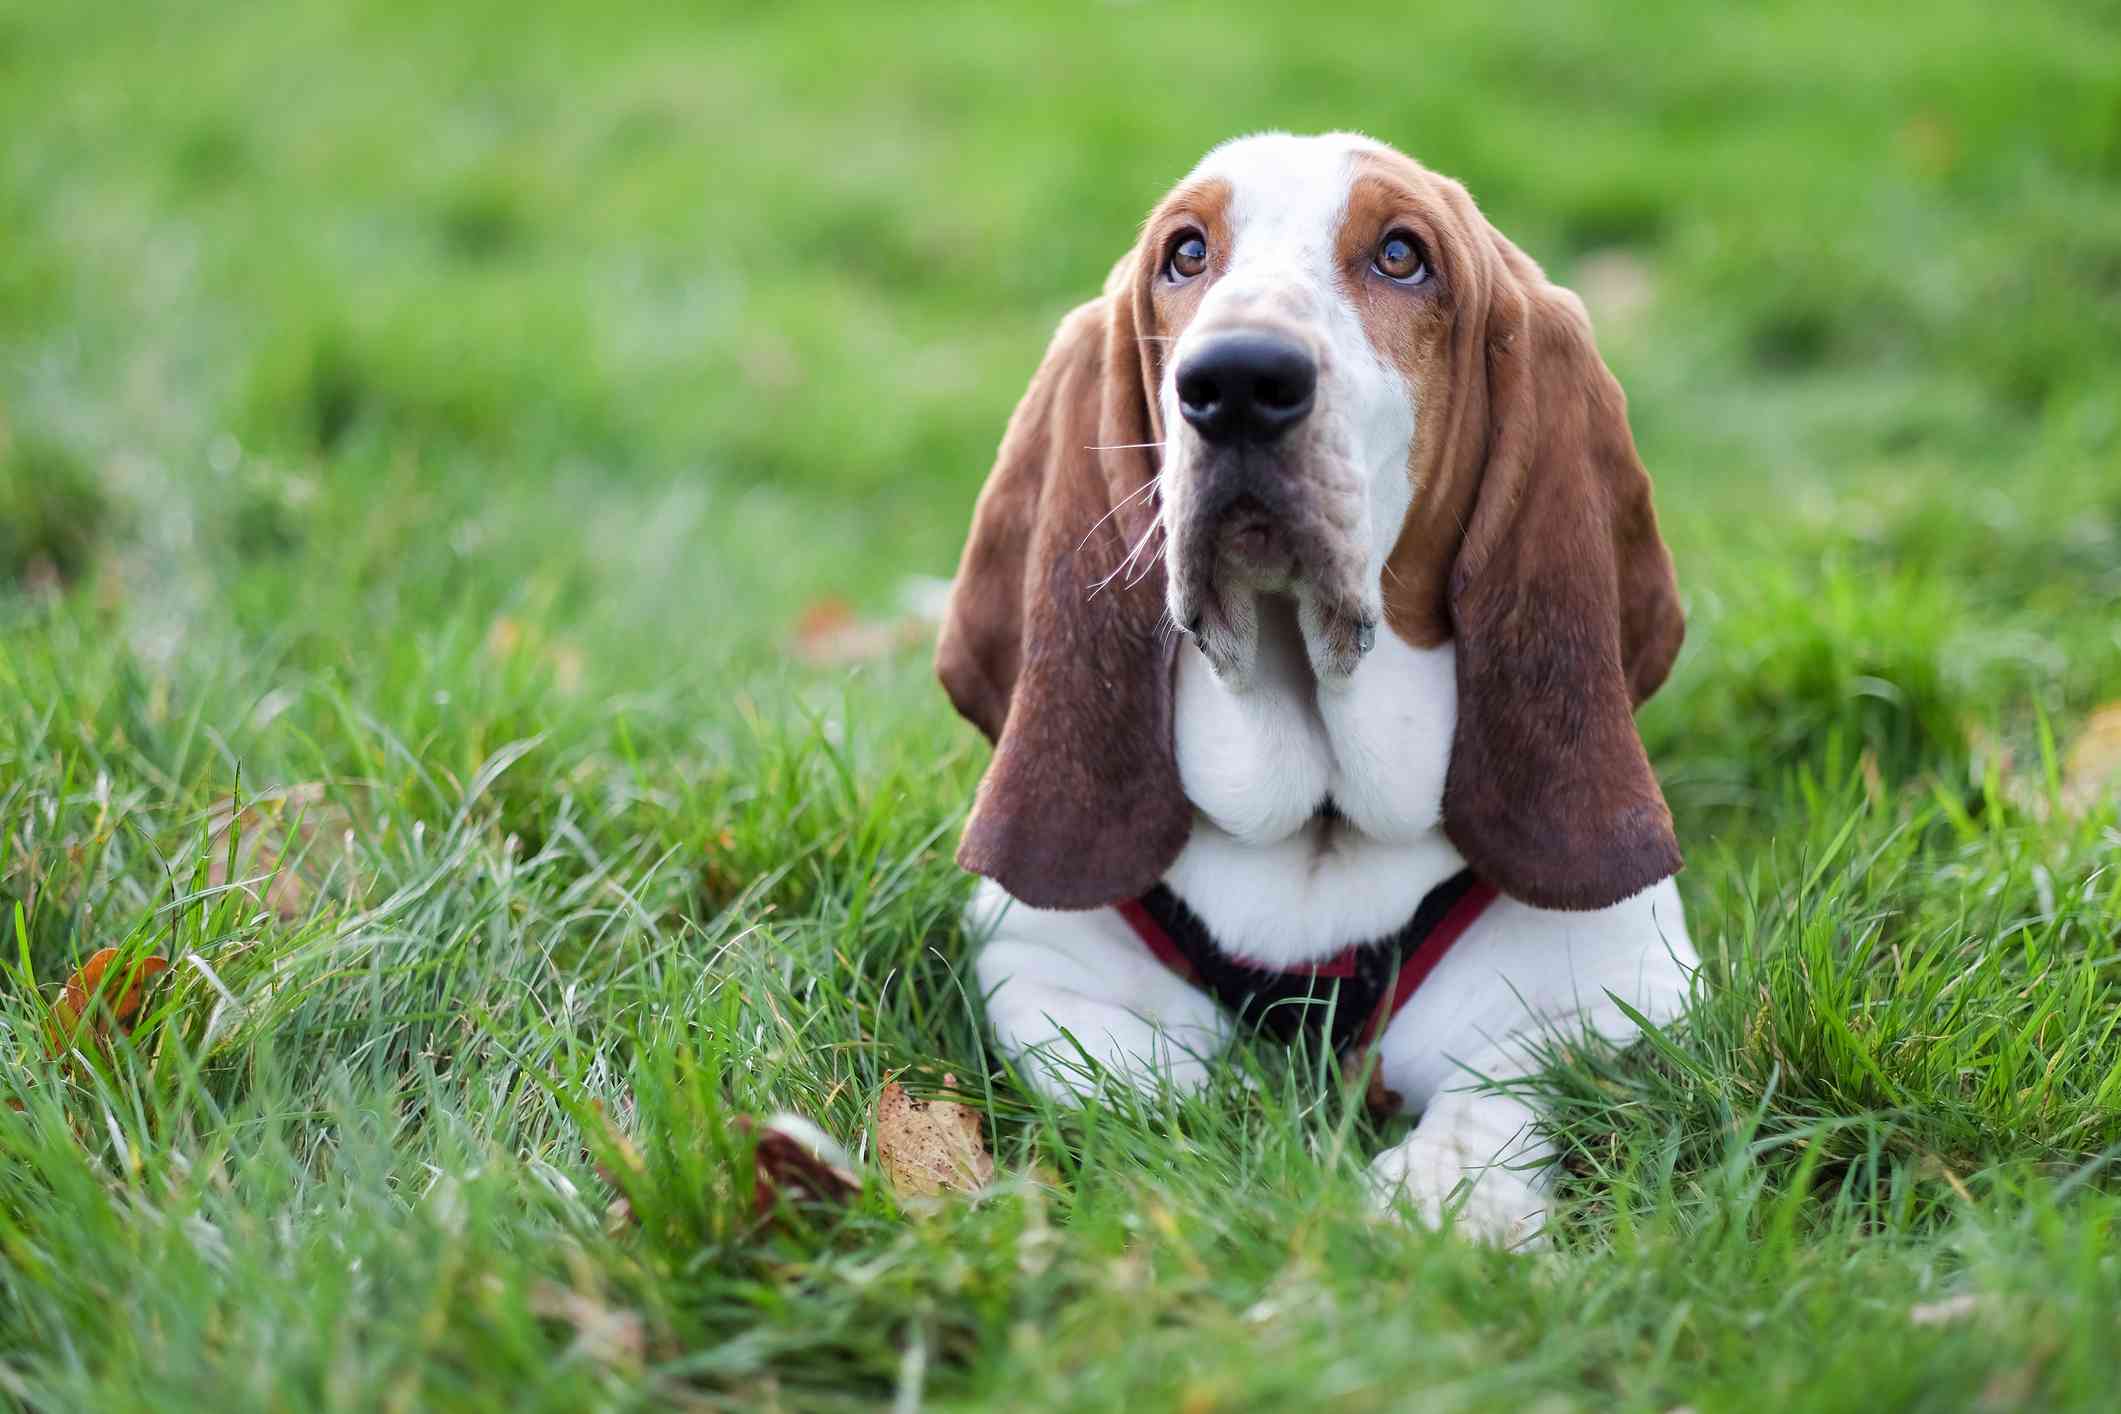 A Basset Hound with long ears laying on the grass and looking at his owner.